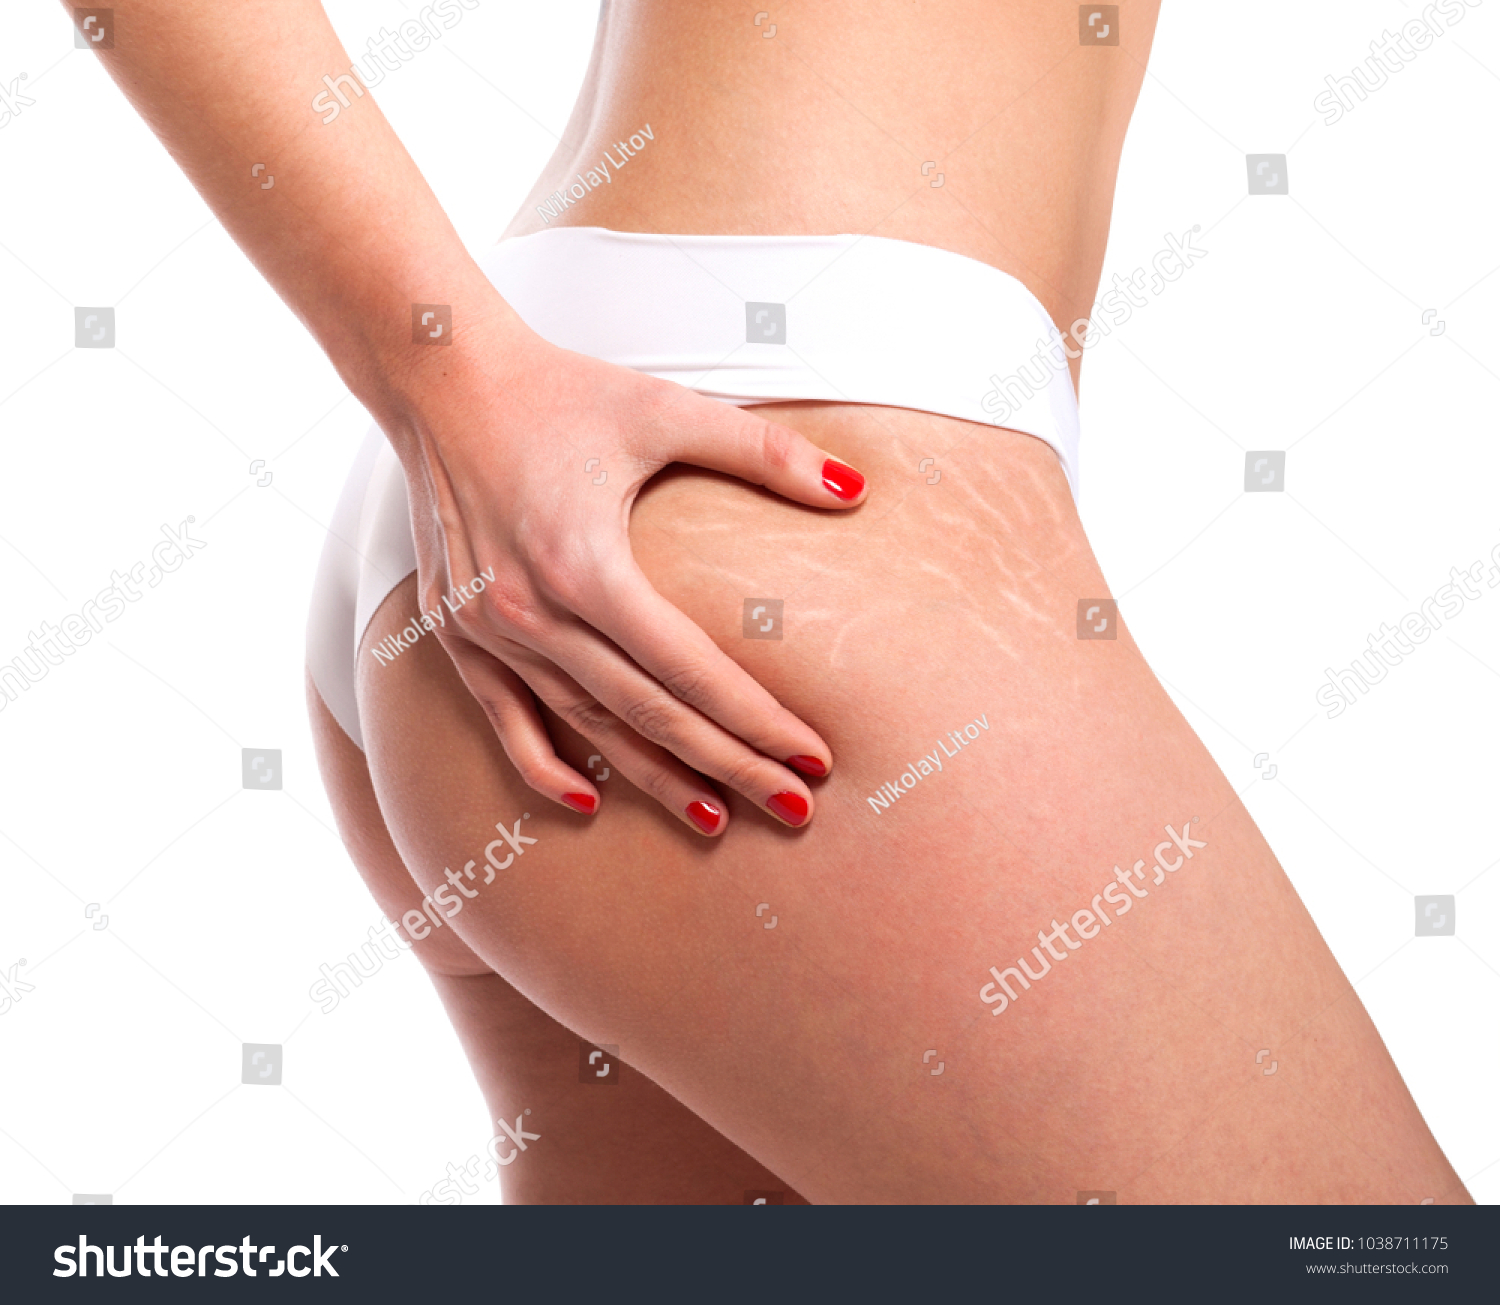 Stretch marks on woman's buttocks. Skin care concept. #1038711175